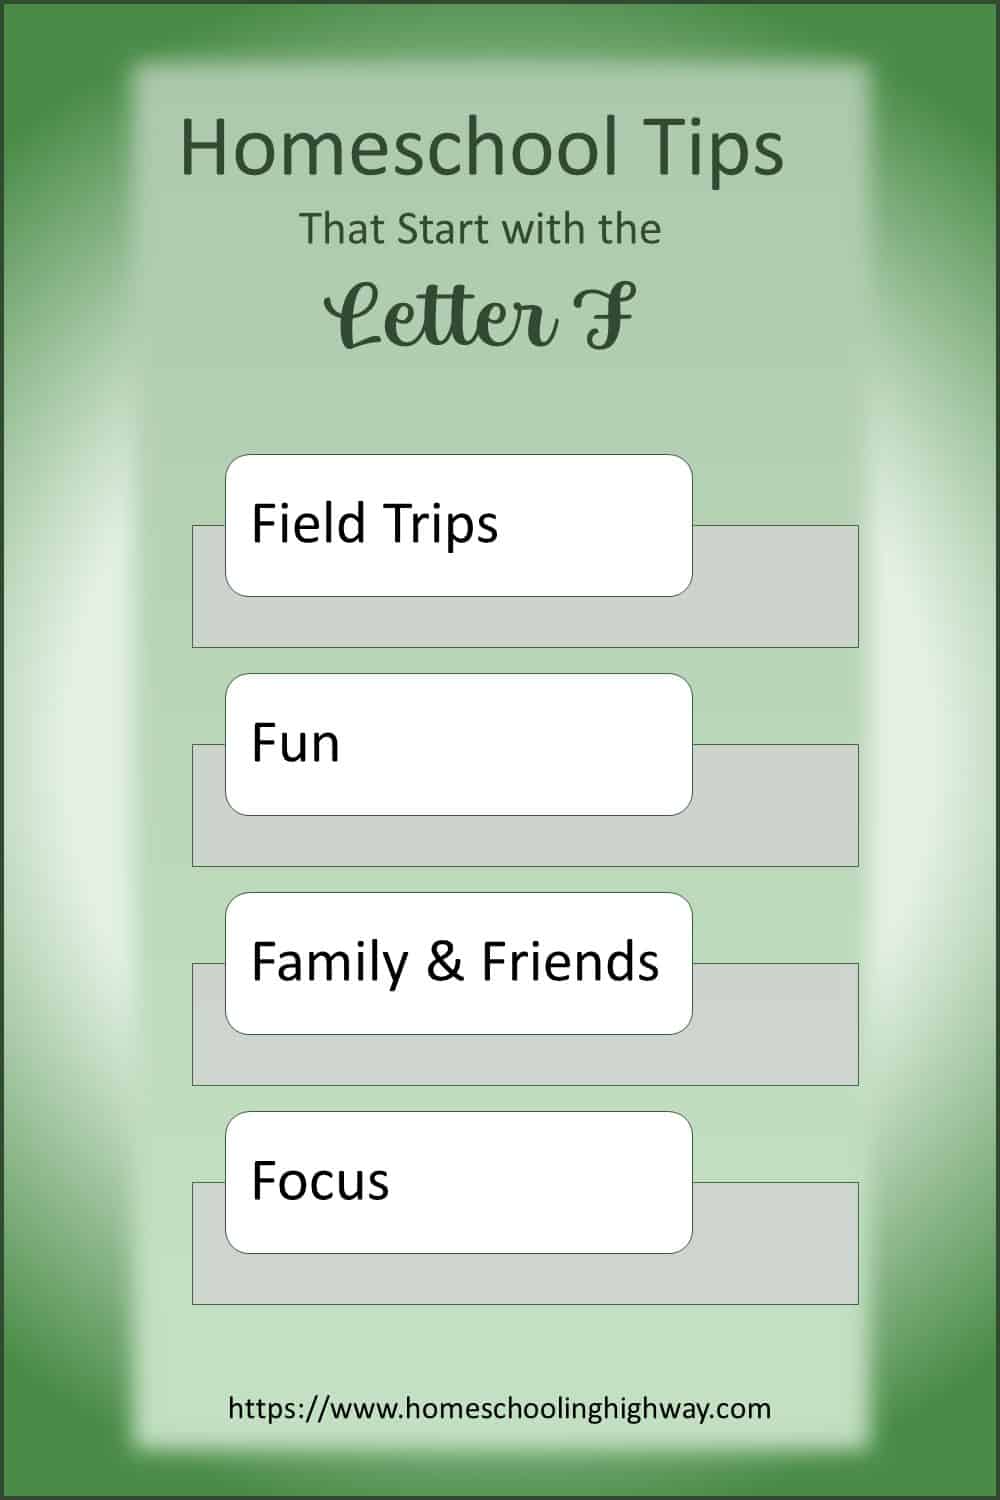 Homeschooling Tips That Start With F. Field Trips, Fun, Family, Friends, Focus